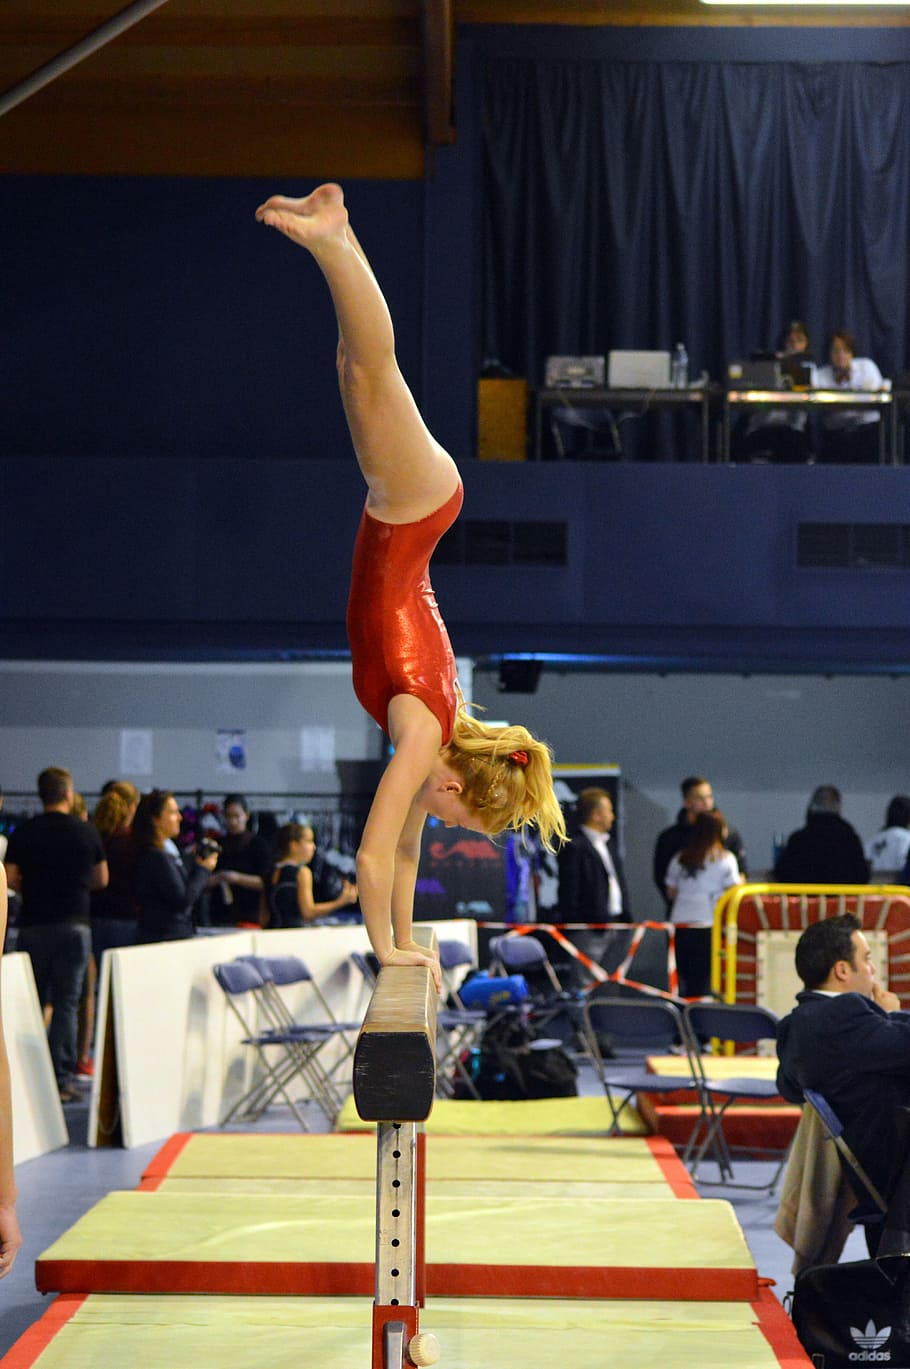 competition, gymnastics, sport, beam, gym, real people, performance, skill, indoors, practicing